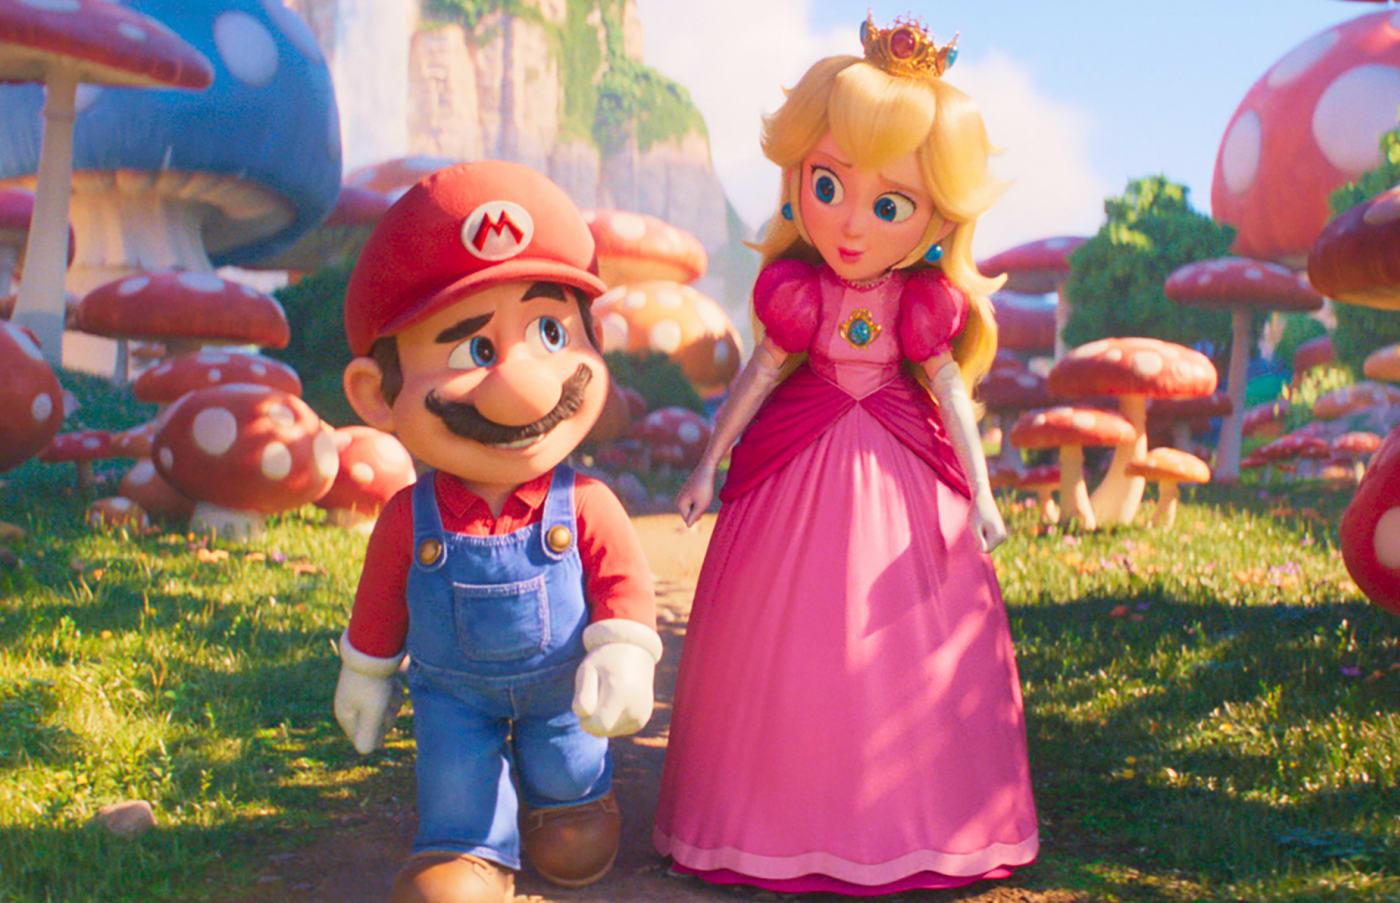 The Super Mario Bros. Movie: All the Secrets and Easters Eggs in